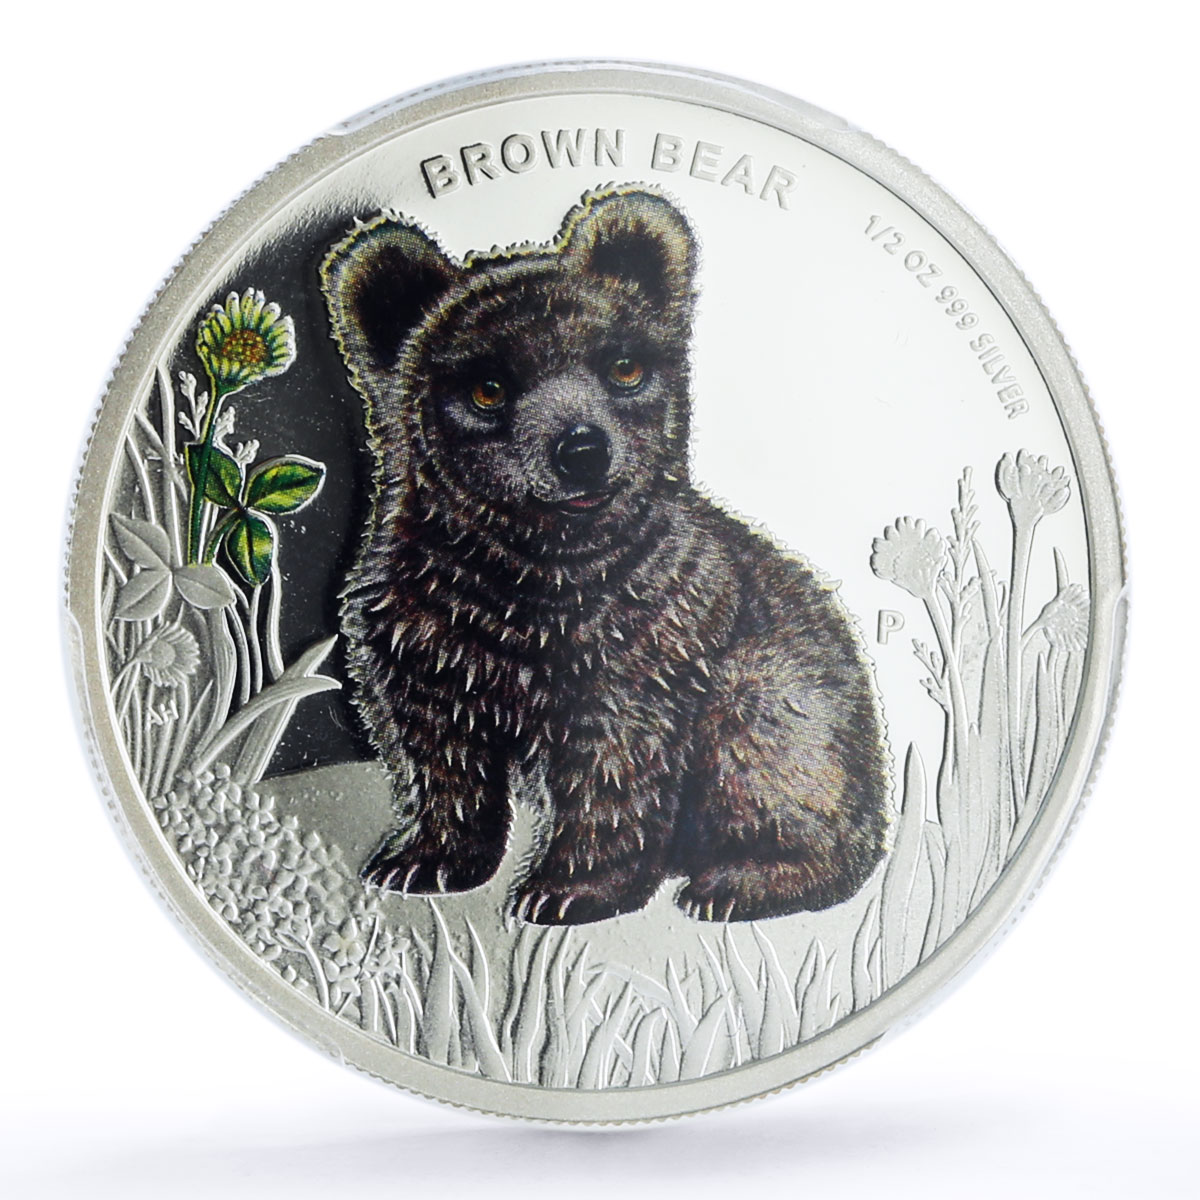 Tuvalu 50 cents Forest Babies Serie Wildlife Brown Bear PR69 PCGS silver 2013